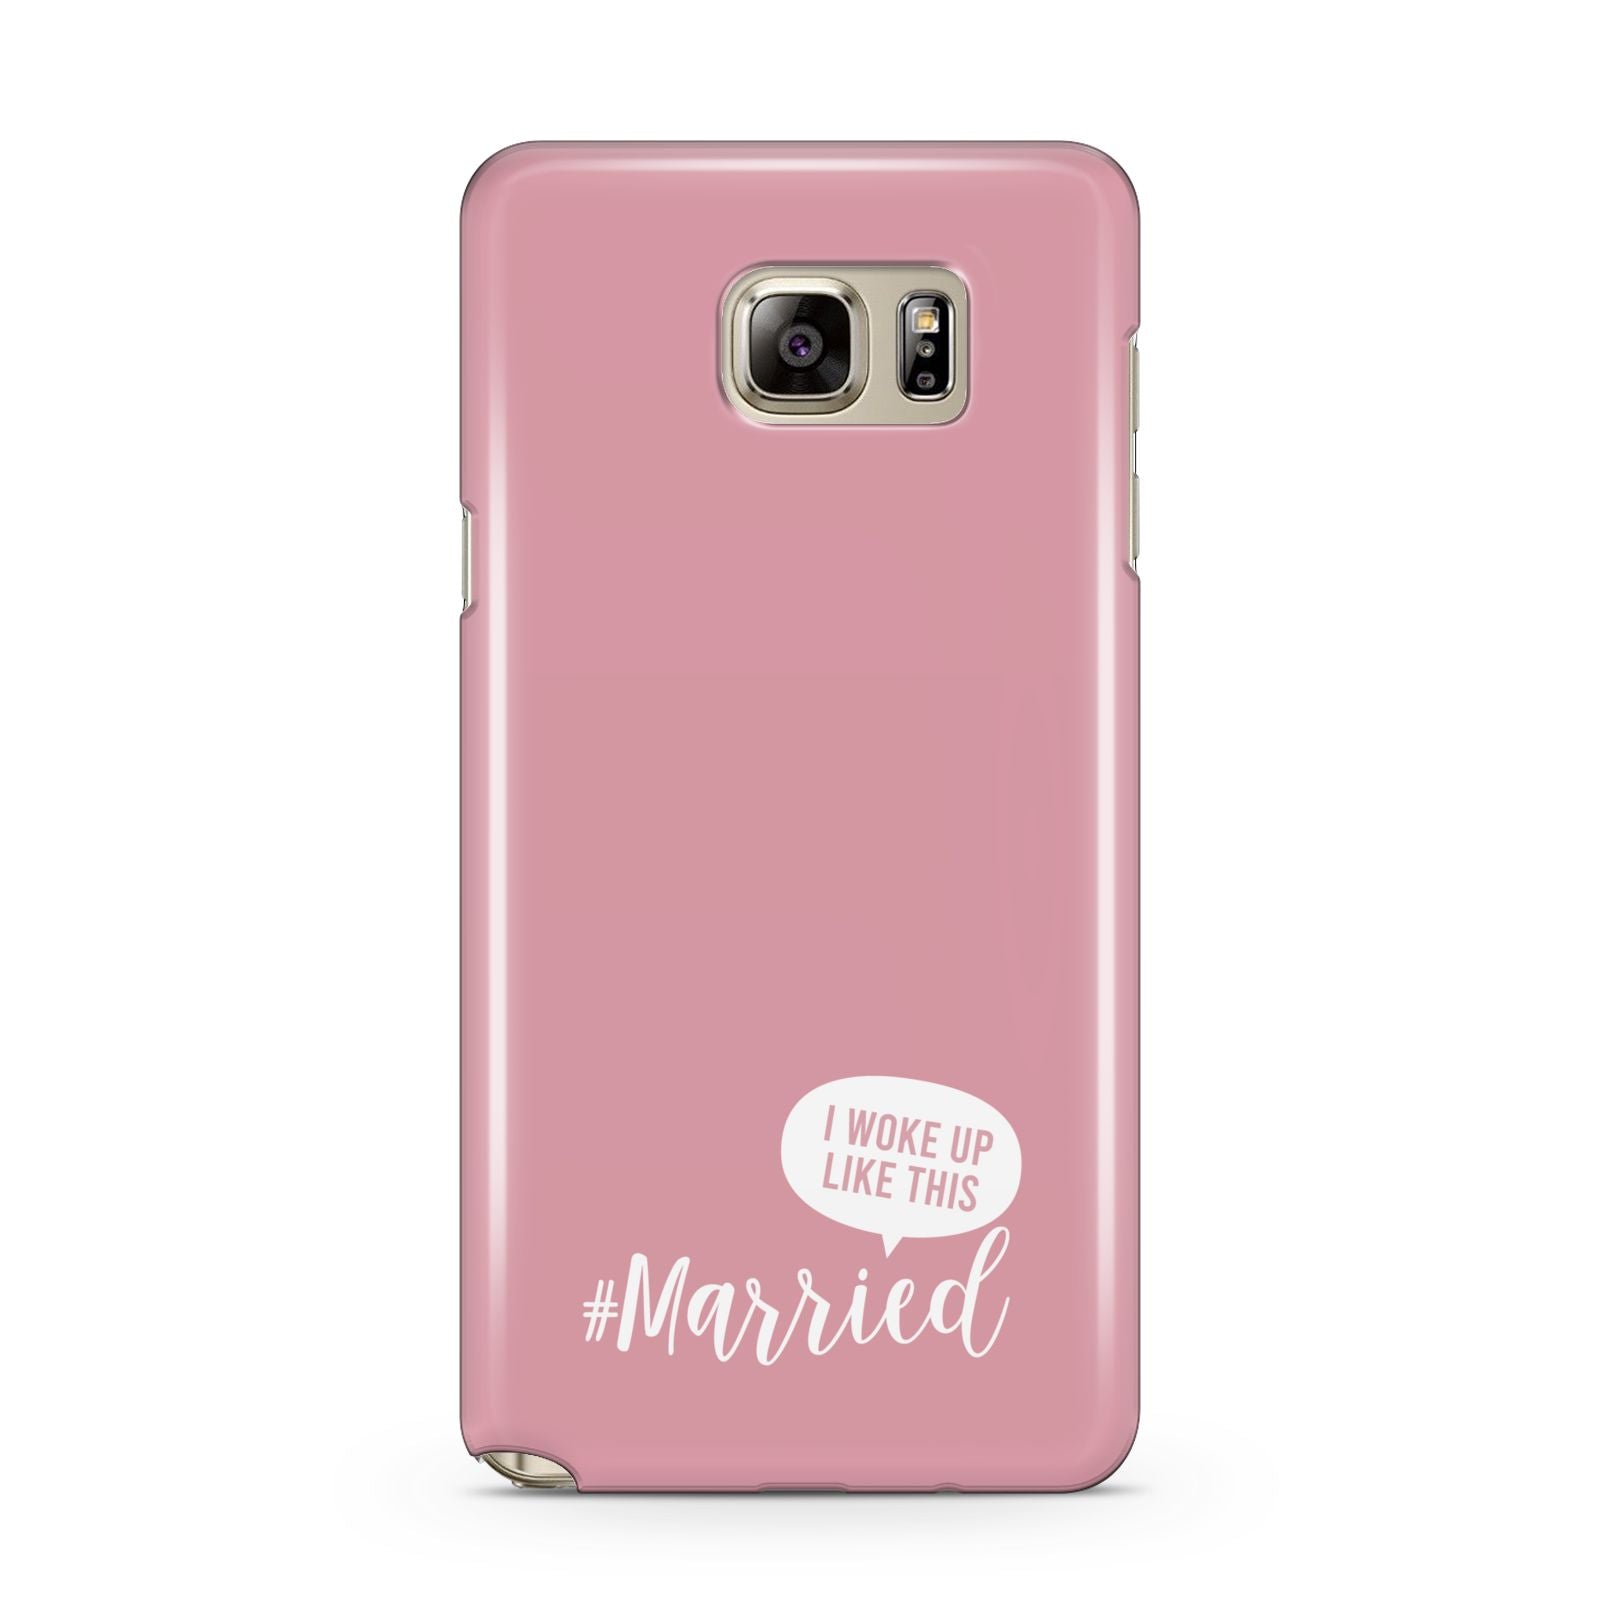 I Woke Up Like This Married Samsung Galaxy Note 5 Case